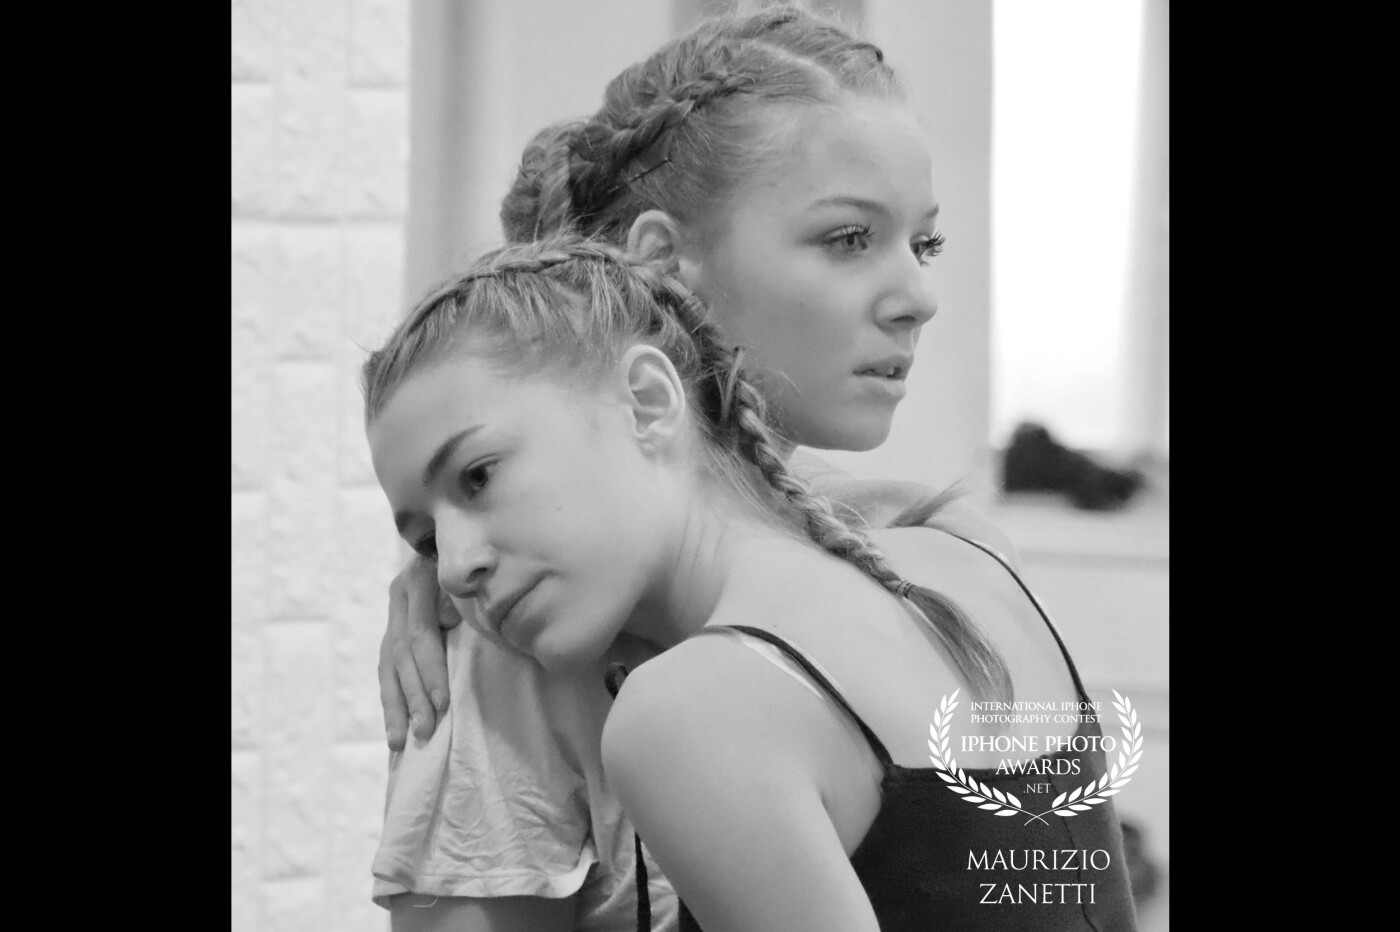 A new show is prepared in a dance school. With the iPhone, it is easier to be discreet and to capture the moments of a hard but sweet job.